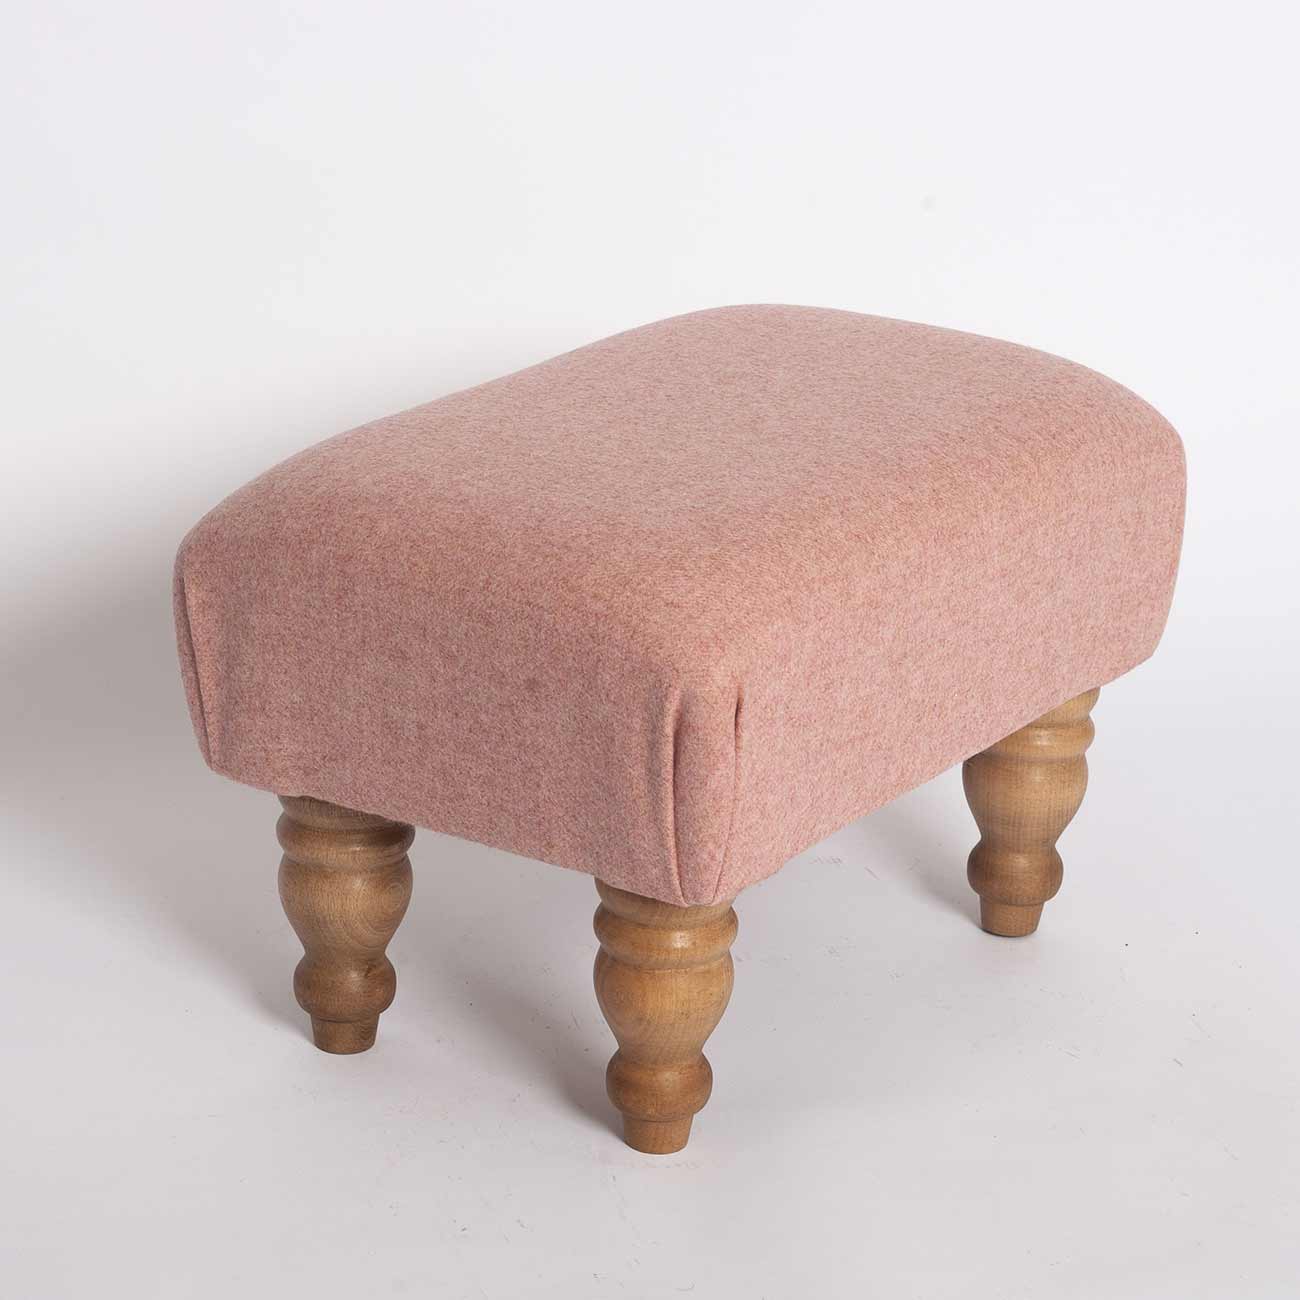 Melton Wool Candy Footstools